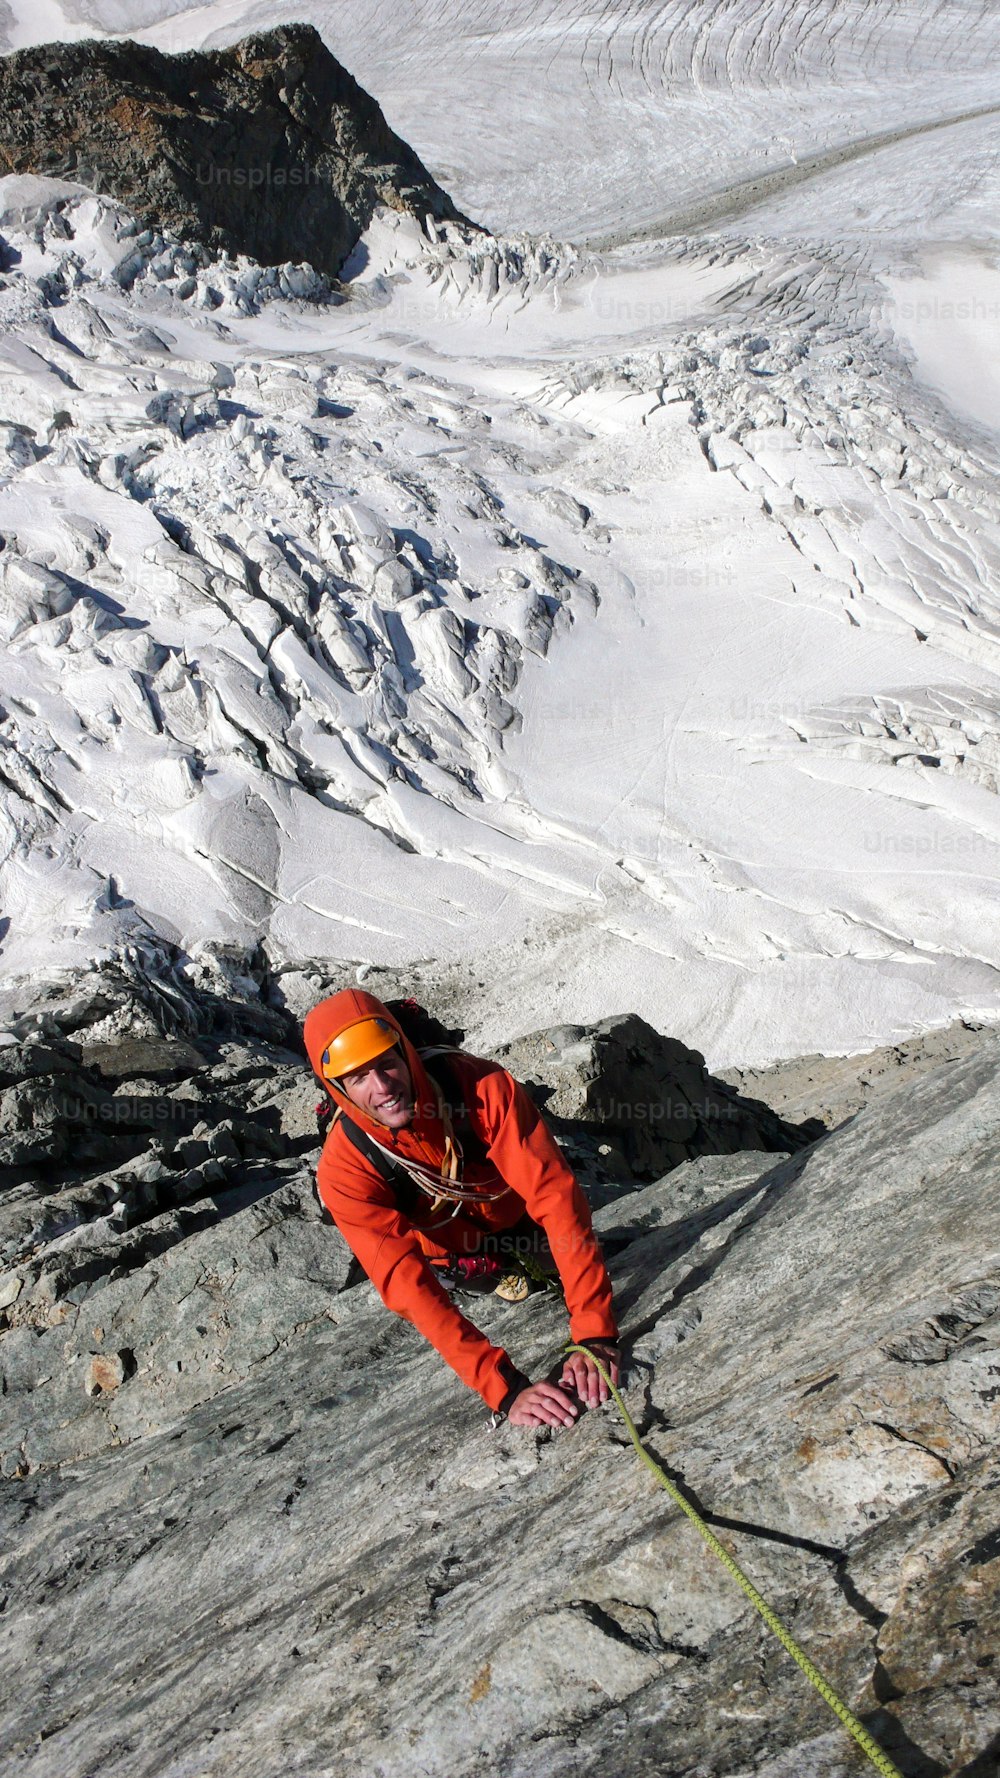 male mountain climber on an exposed climbing route high above a glacier in the Swiss Alps near St. Moritz